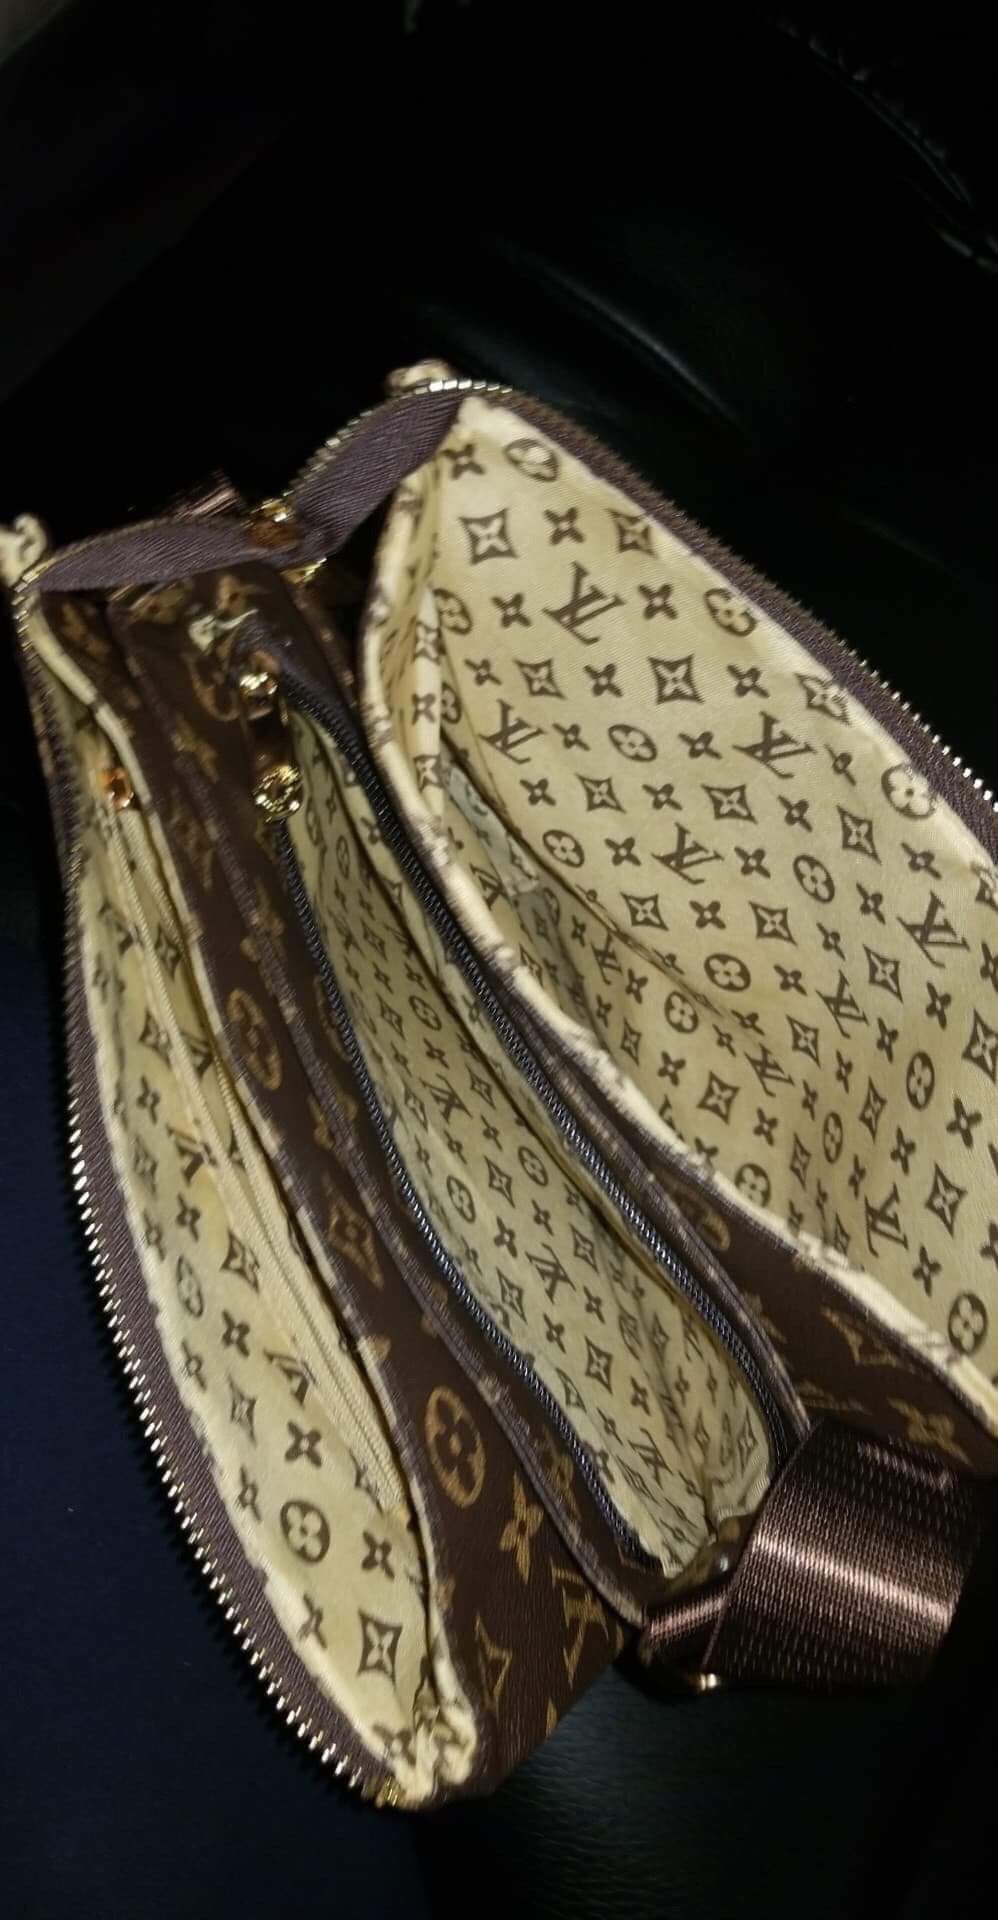 Louis Vuitton for Sale in WA, US - OfferUp